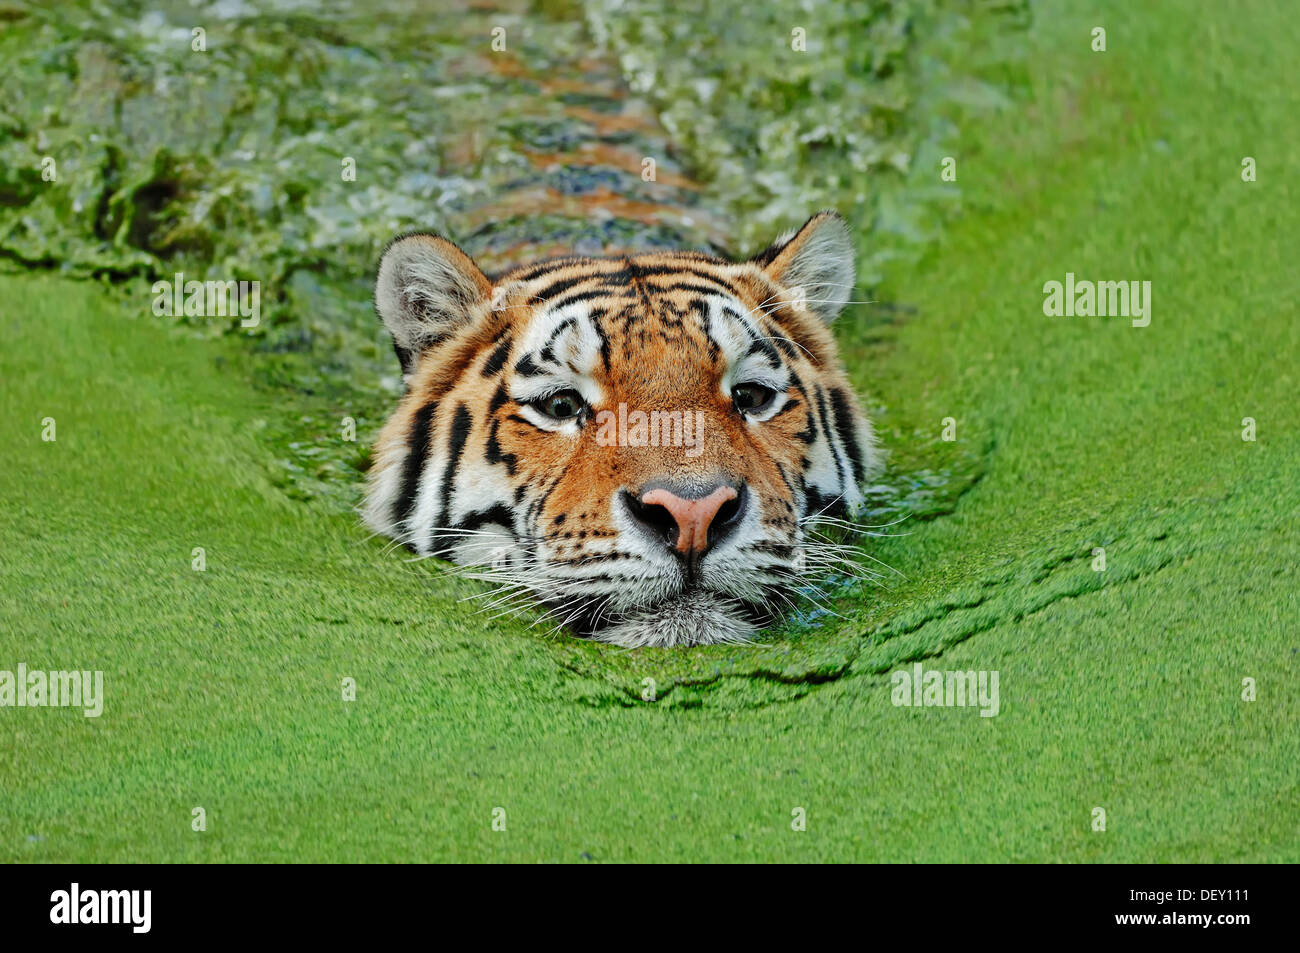 Siberian Tiger or Amur Tiger (Panthera tigris altaica) in water, native to Asia, in captivity Stock Photo